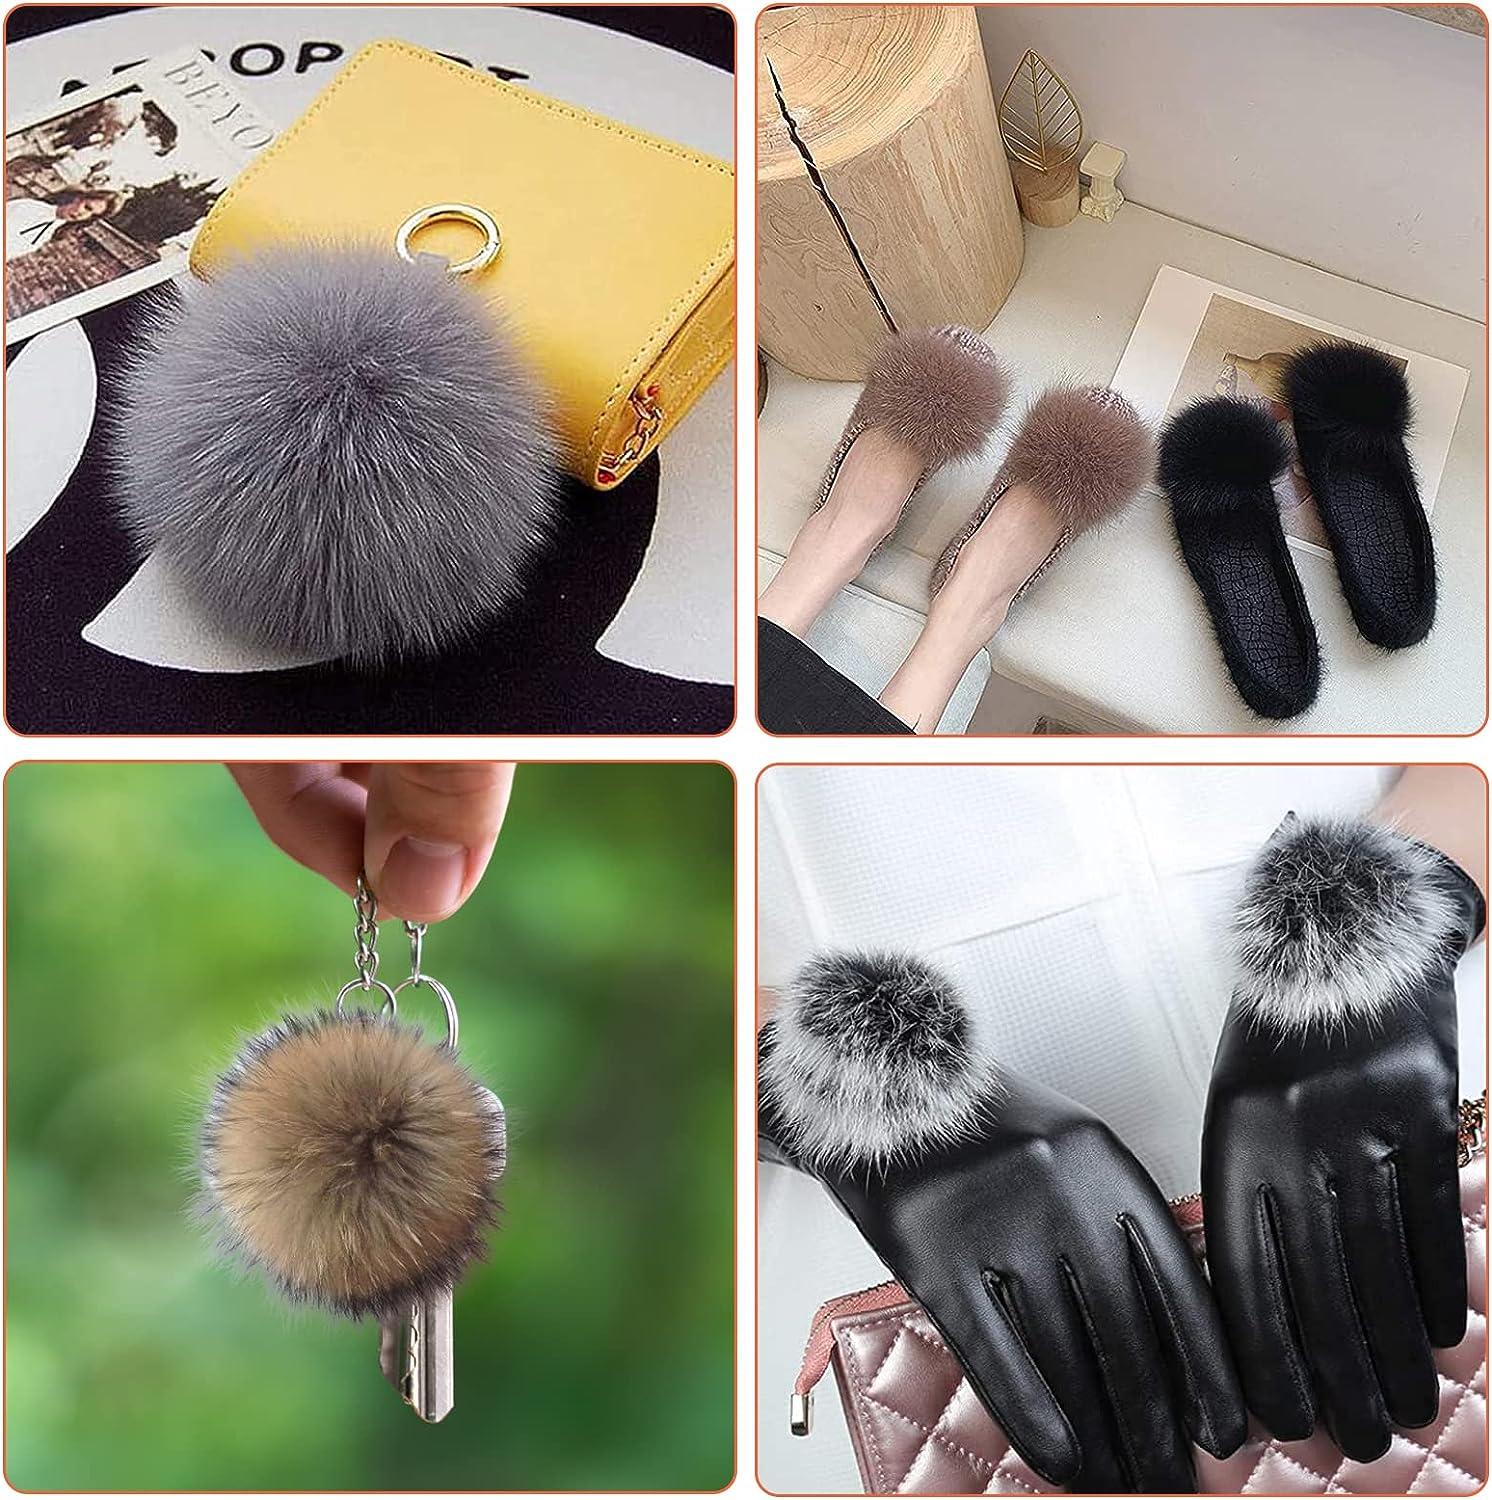 SIQUK 24 Pieces Faux Fur Pom Pom Balls DIY Faux Fox Fur Fluffy Pom Poms with Elastic Loop for Hats Keychains Scarves Gloves Bags Accessories (12